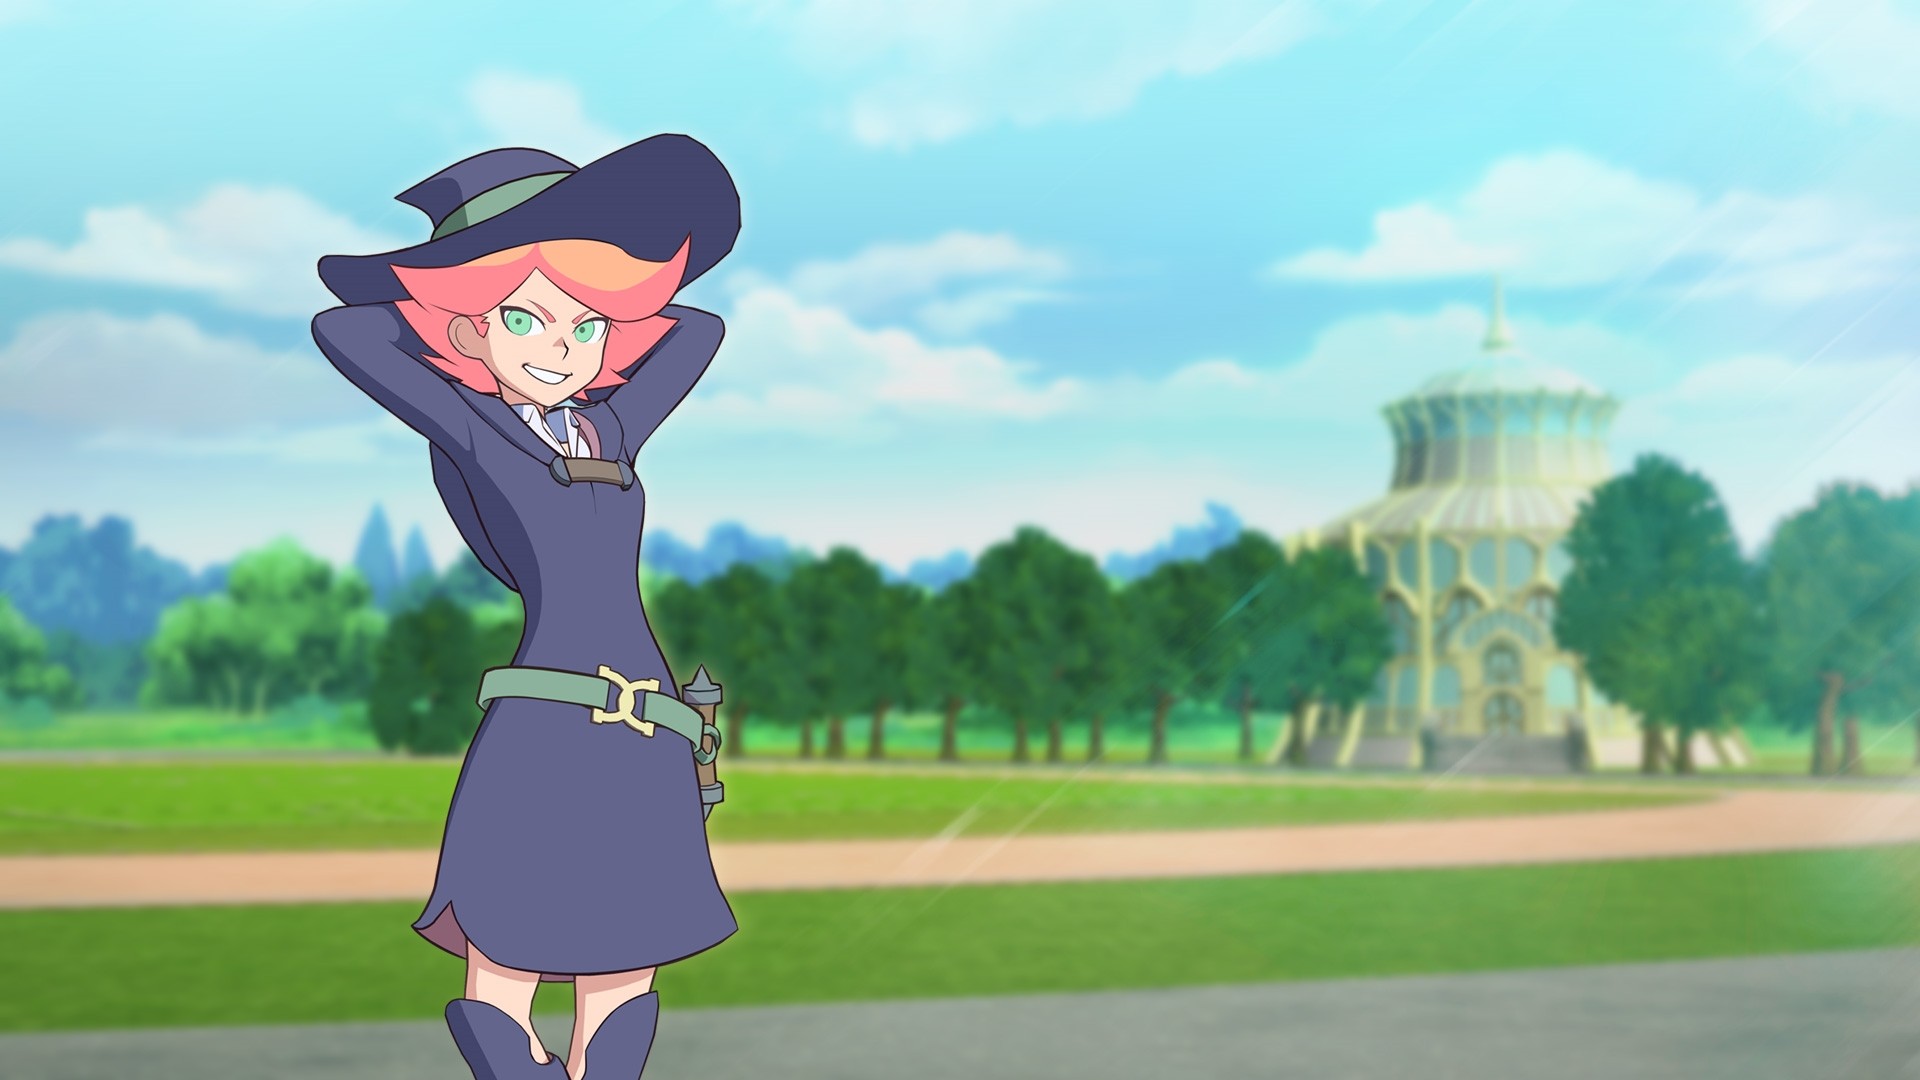 Little Witch Academia hd wallpaper download